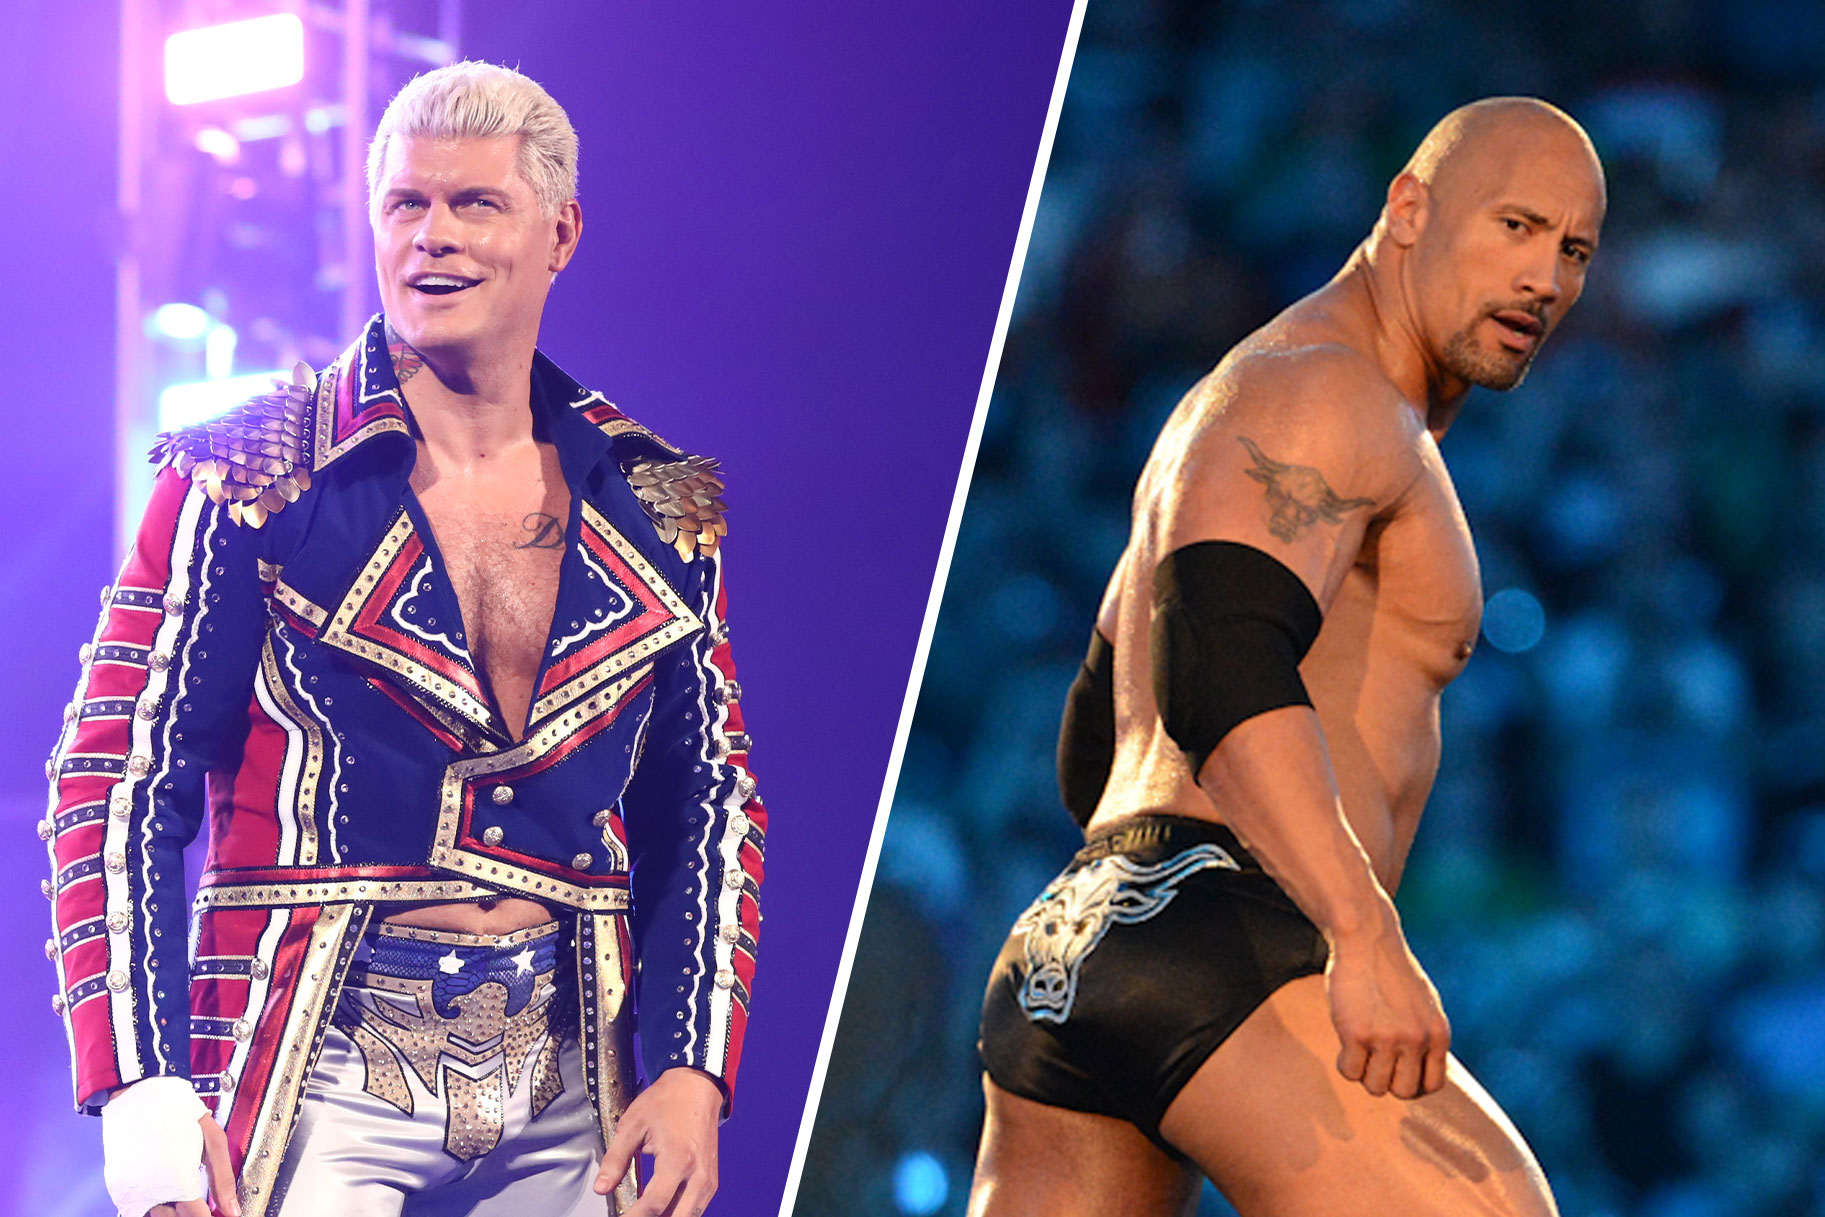 Split image of Cody Rhodes and The Rock